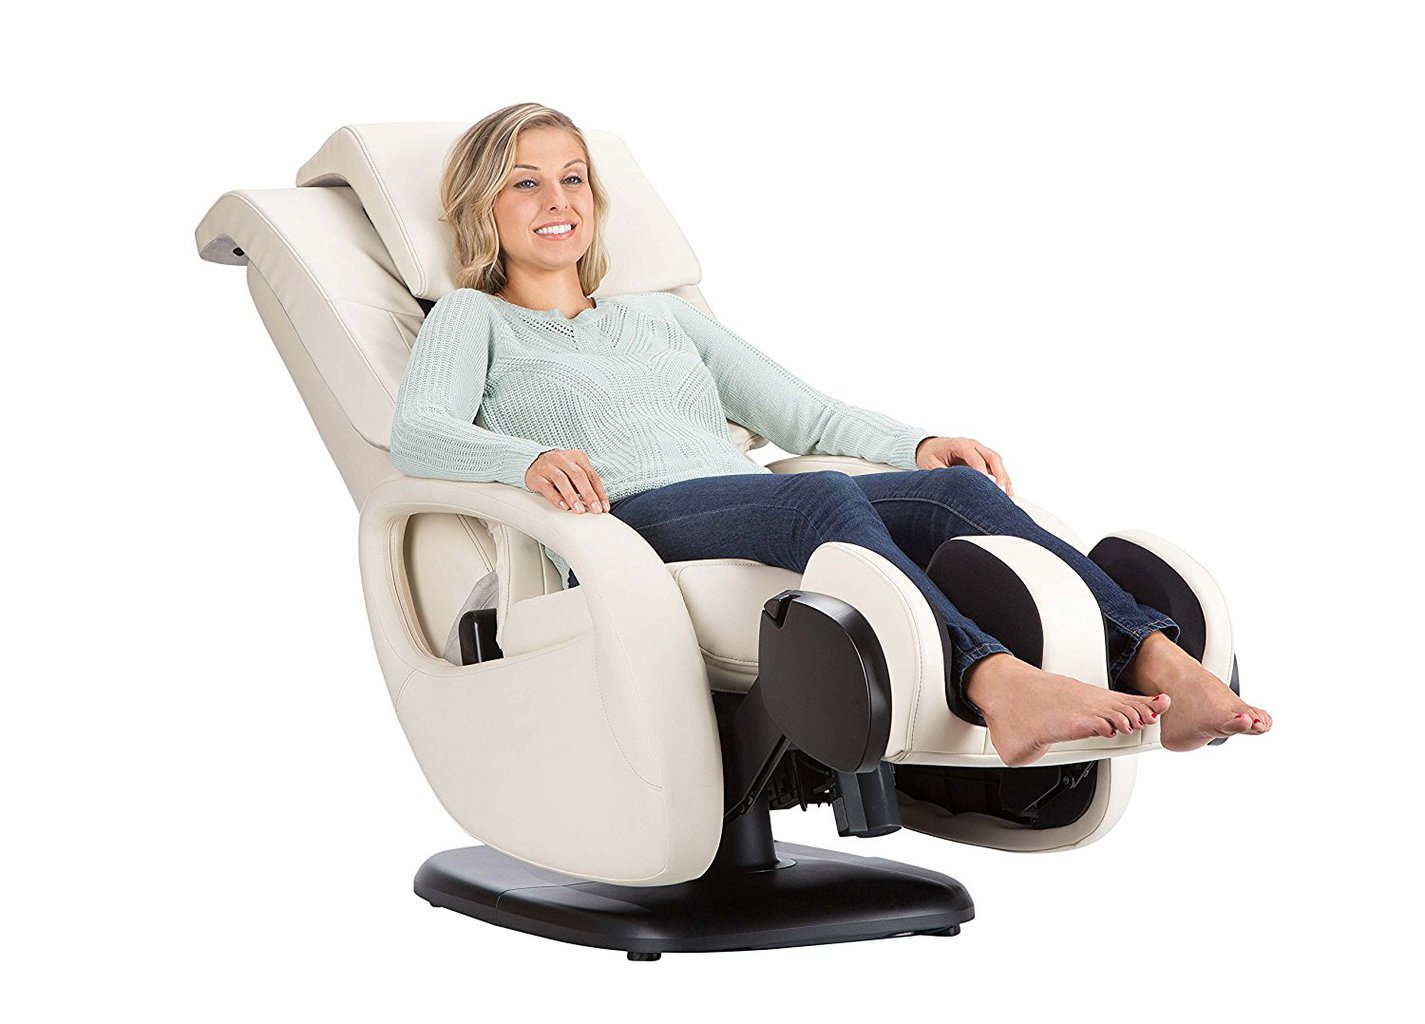 Top 3 Best HUMAN TOUCH Massage Chairs (Cheap & Best) Review 2022